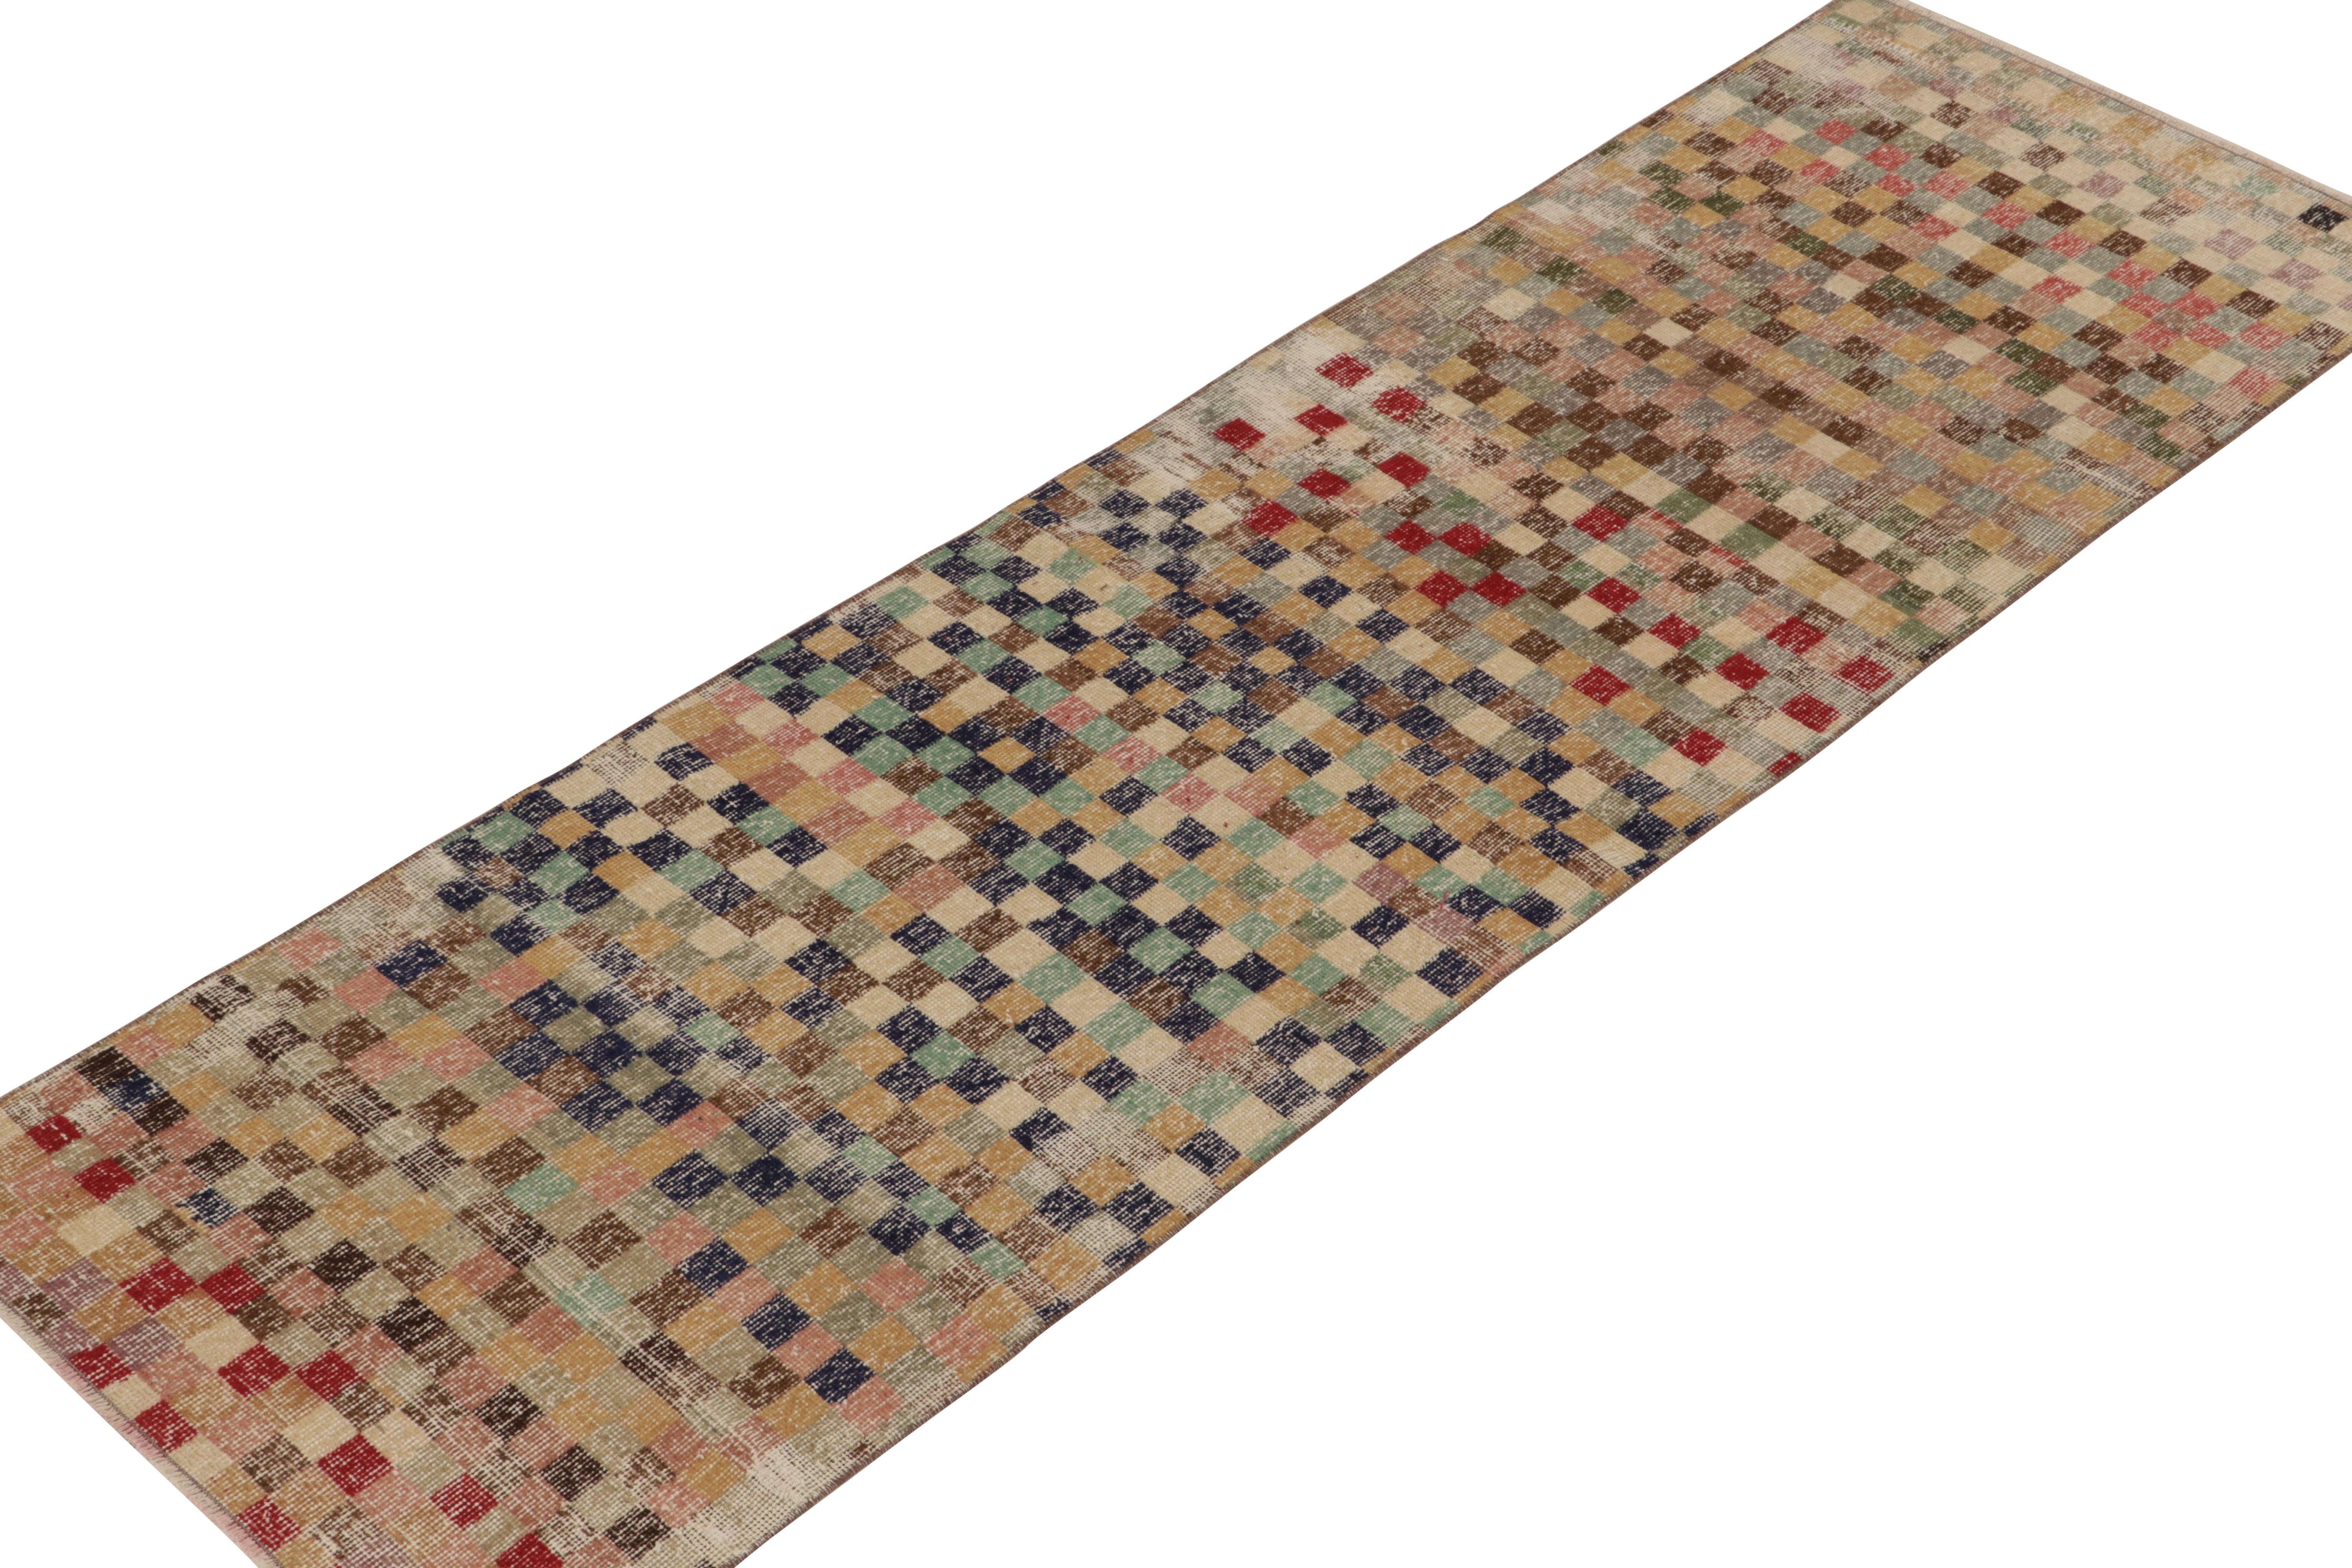 This vintage 3x9 runner is a new addition to Rug & Kilim’s commemorative Mid-Century Pasha Collection. This line is a commemoration of rare curations we believe to hail from multidisciplinary Turkish designer Zeki Müren.

Further on the